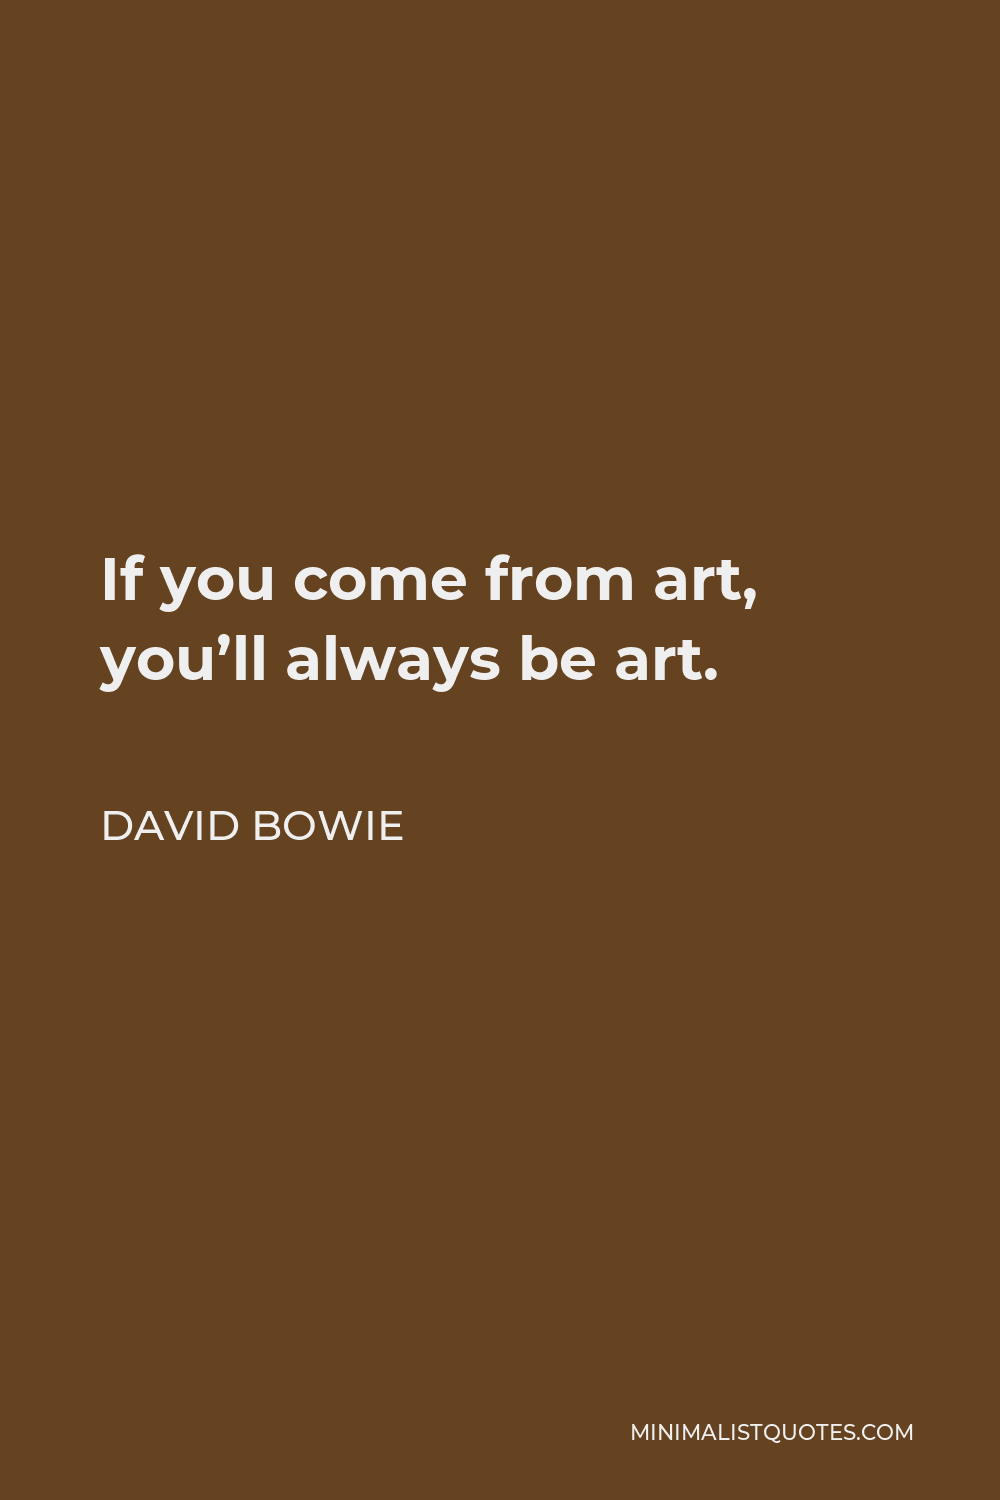 David Bowie Quote - If you come from art, you’ll always be art.